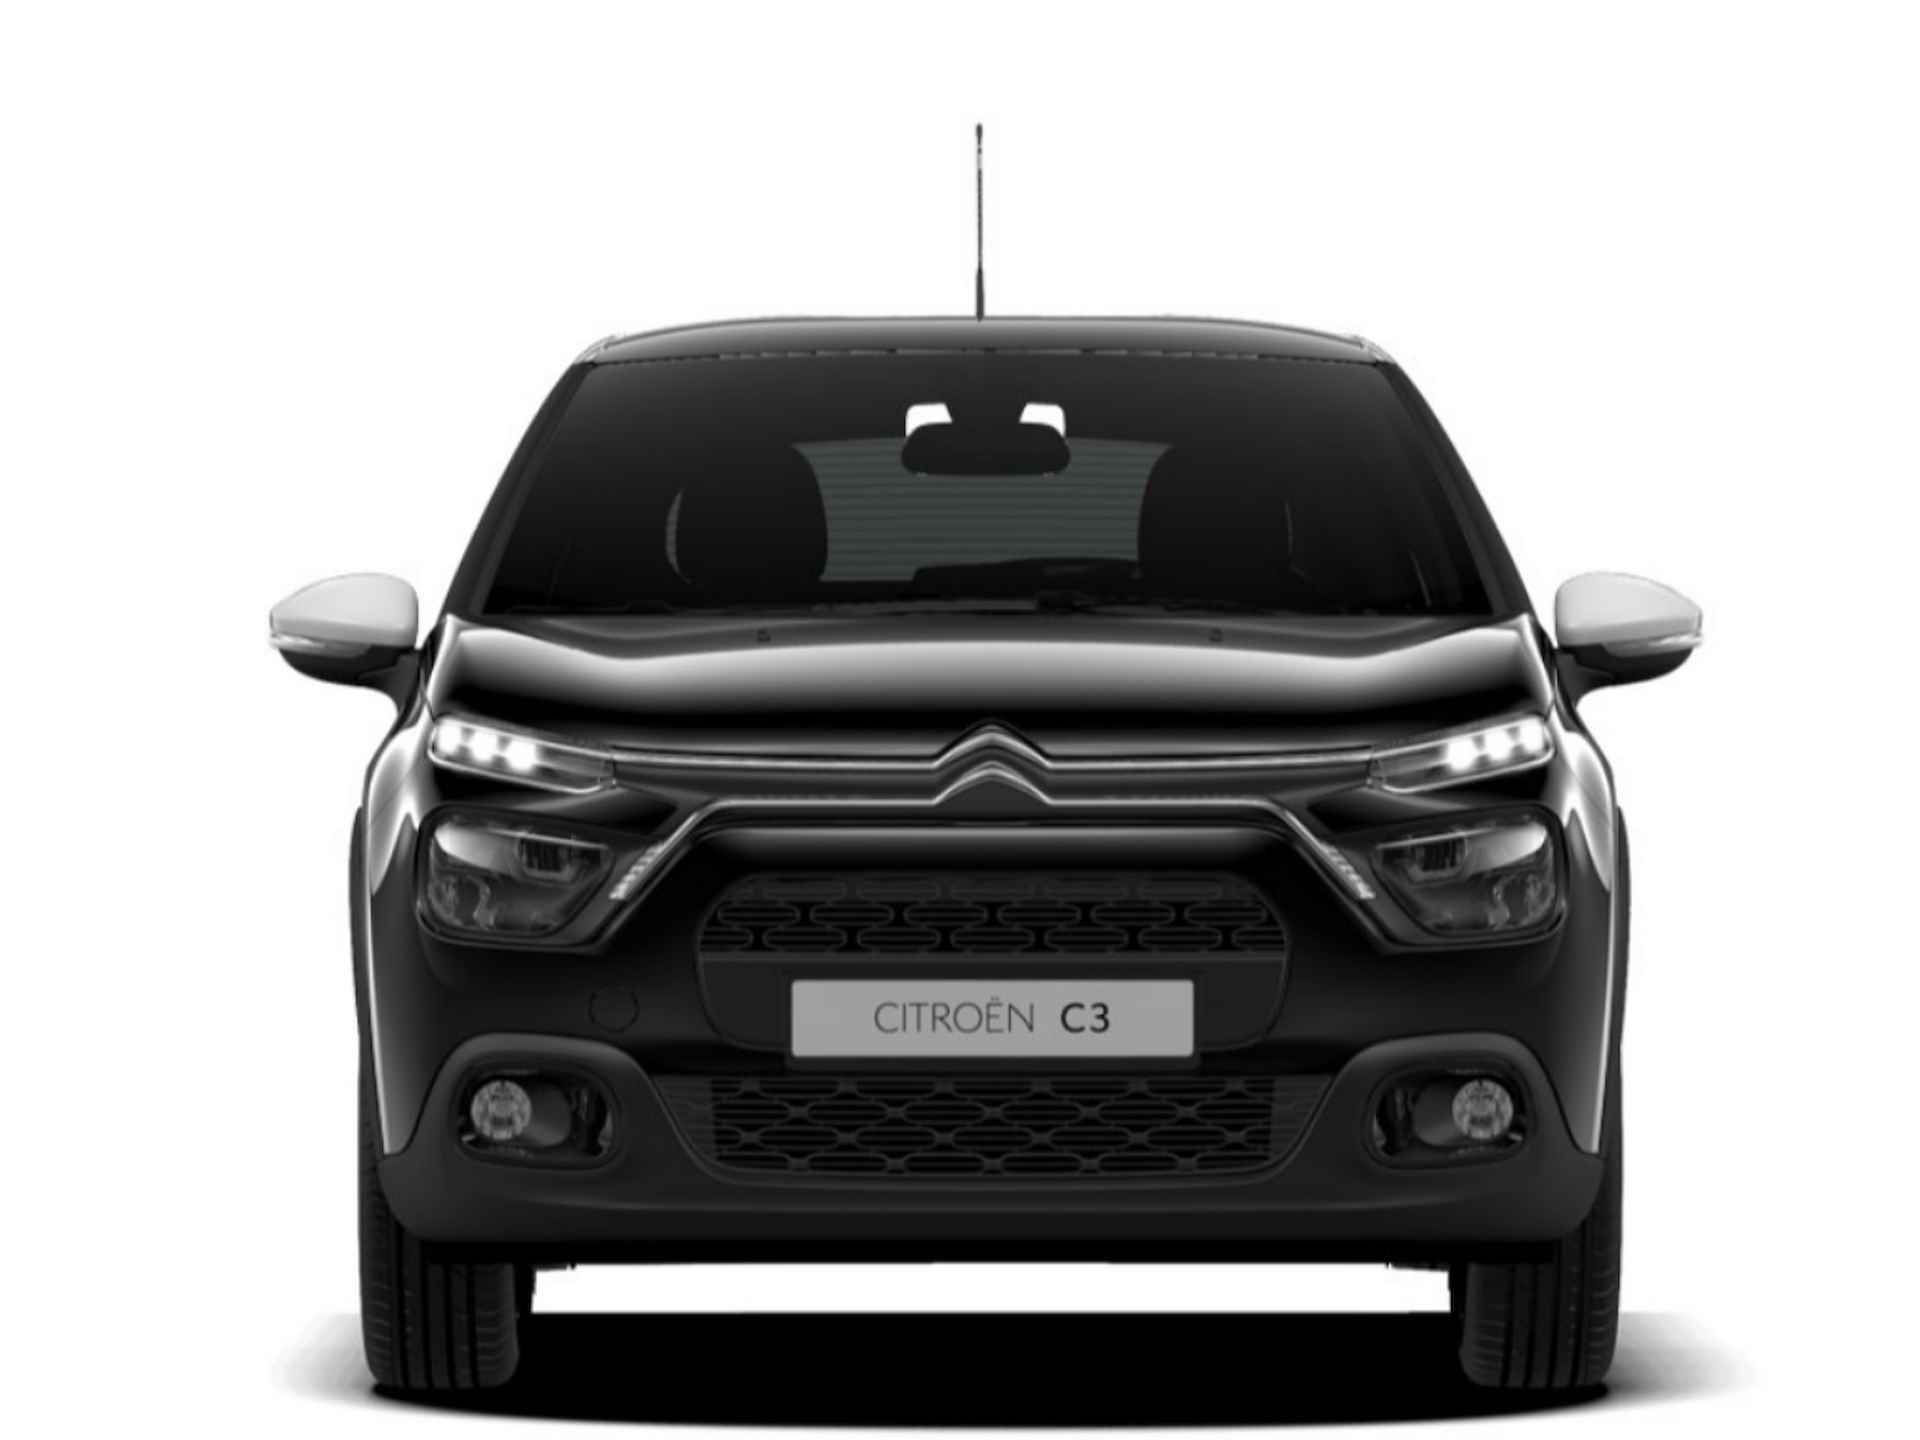 Citroën C3 1.2 PureTech Feel Edition | Ambiance Wood | Connect Nav DAB + 7” Touchscreen - 5/8